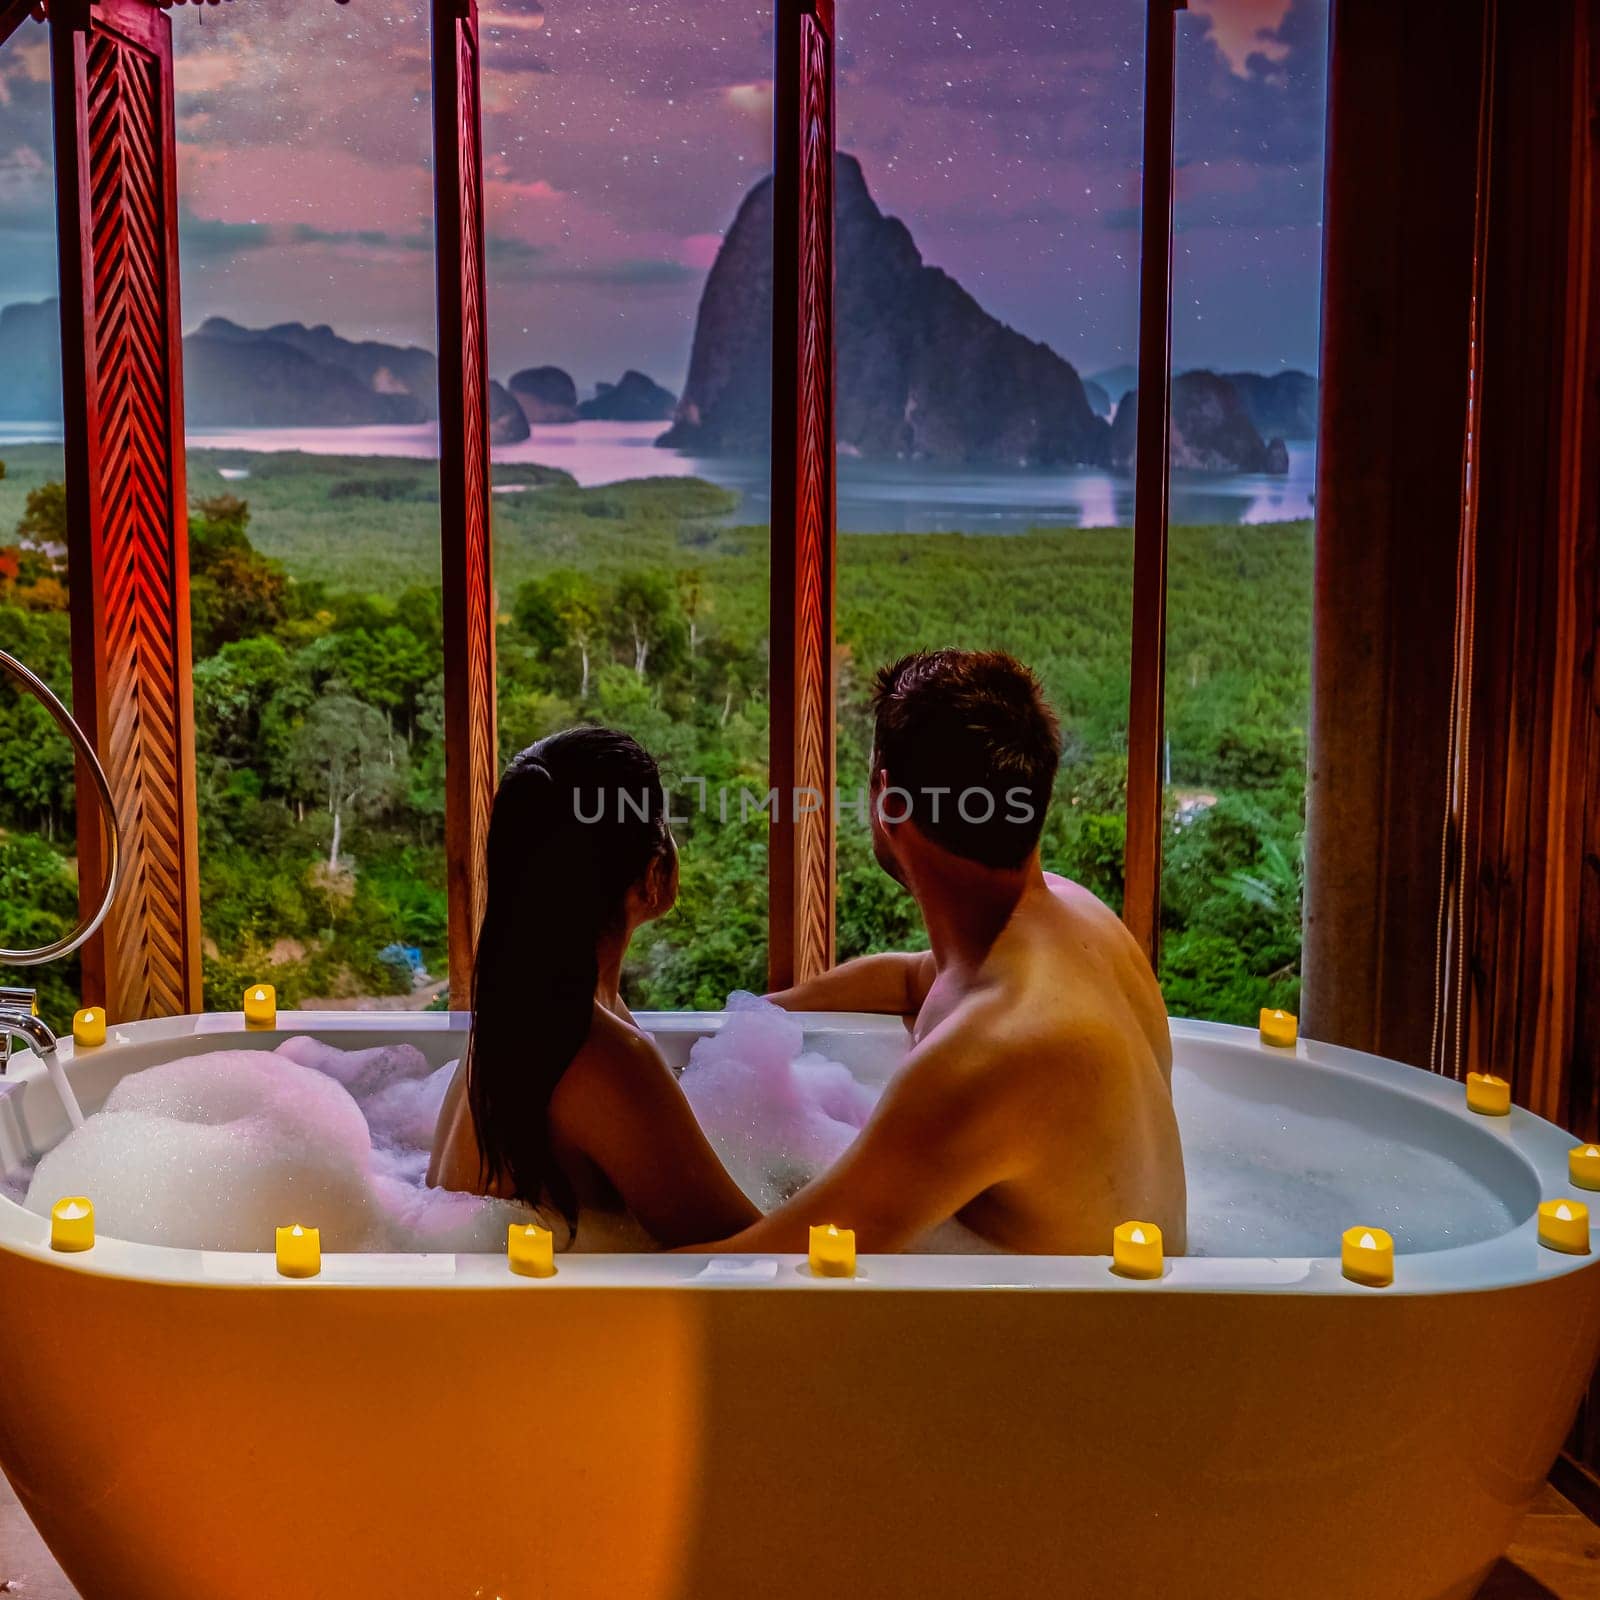 Phangnga Bay, Samet Nang She viewpoint sunset over the bay, couple honeymoon vacation Thailand watching the sunrise, couple men and women in the bathtub watching the sunset from their room